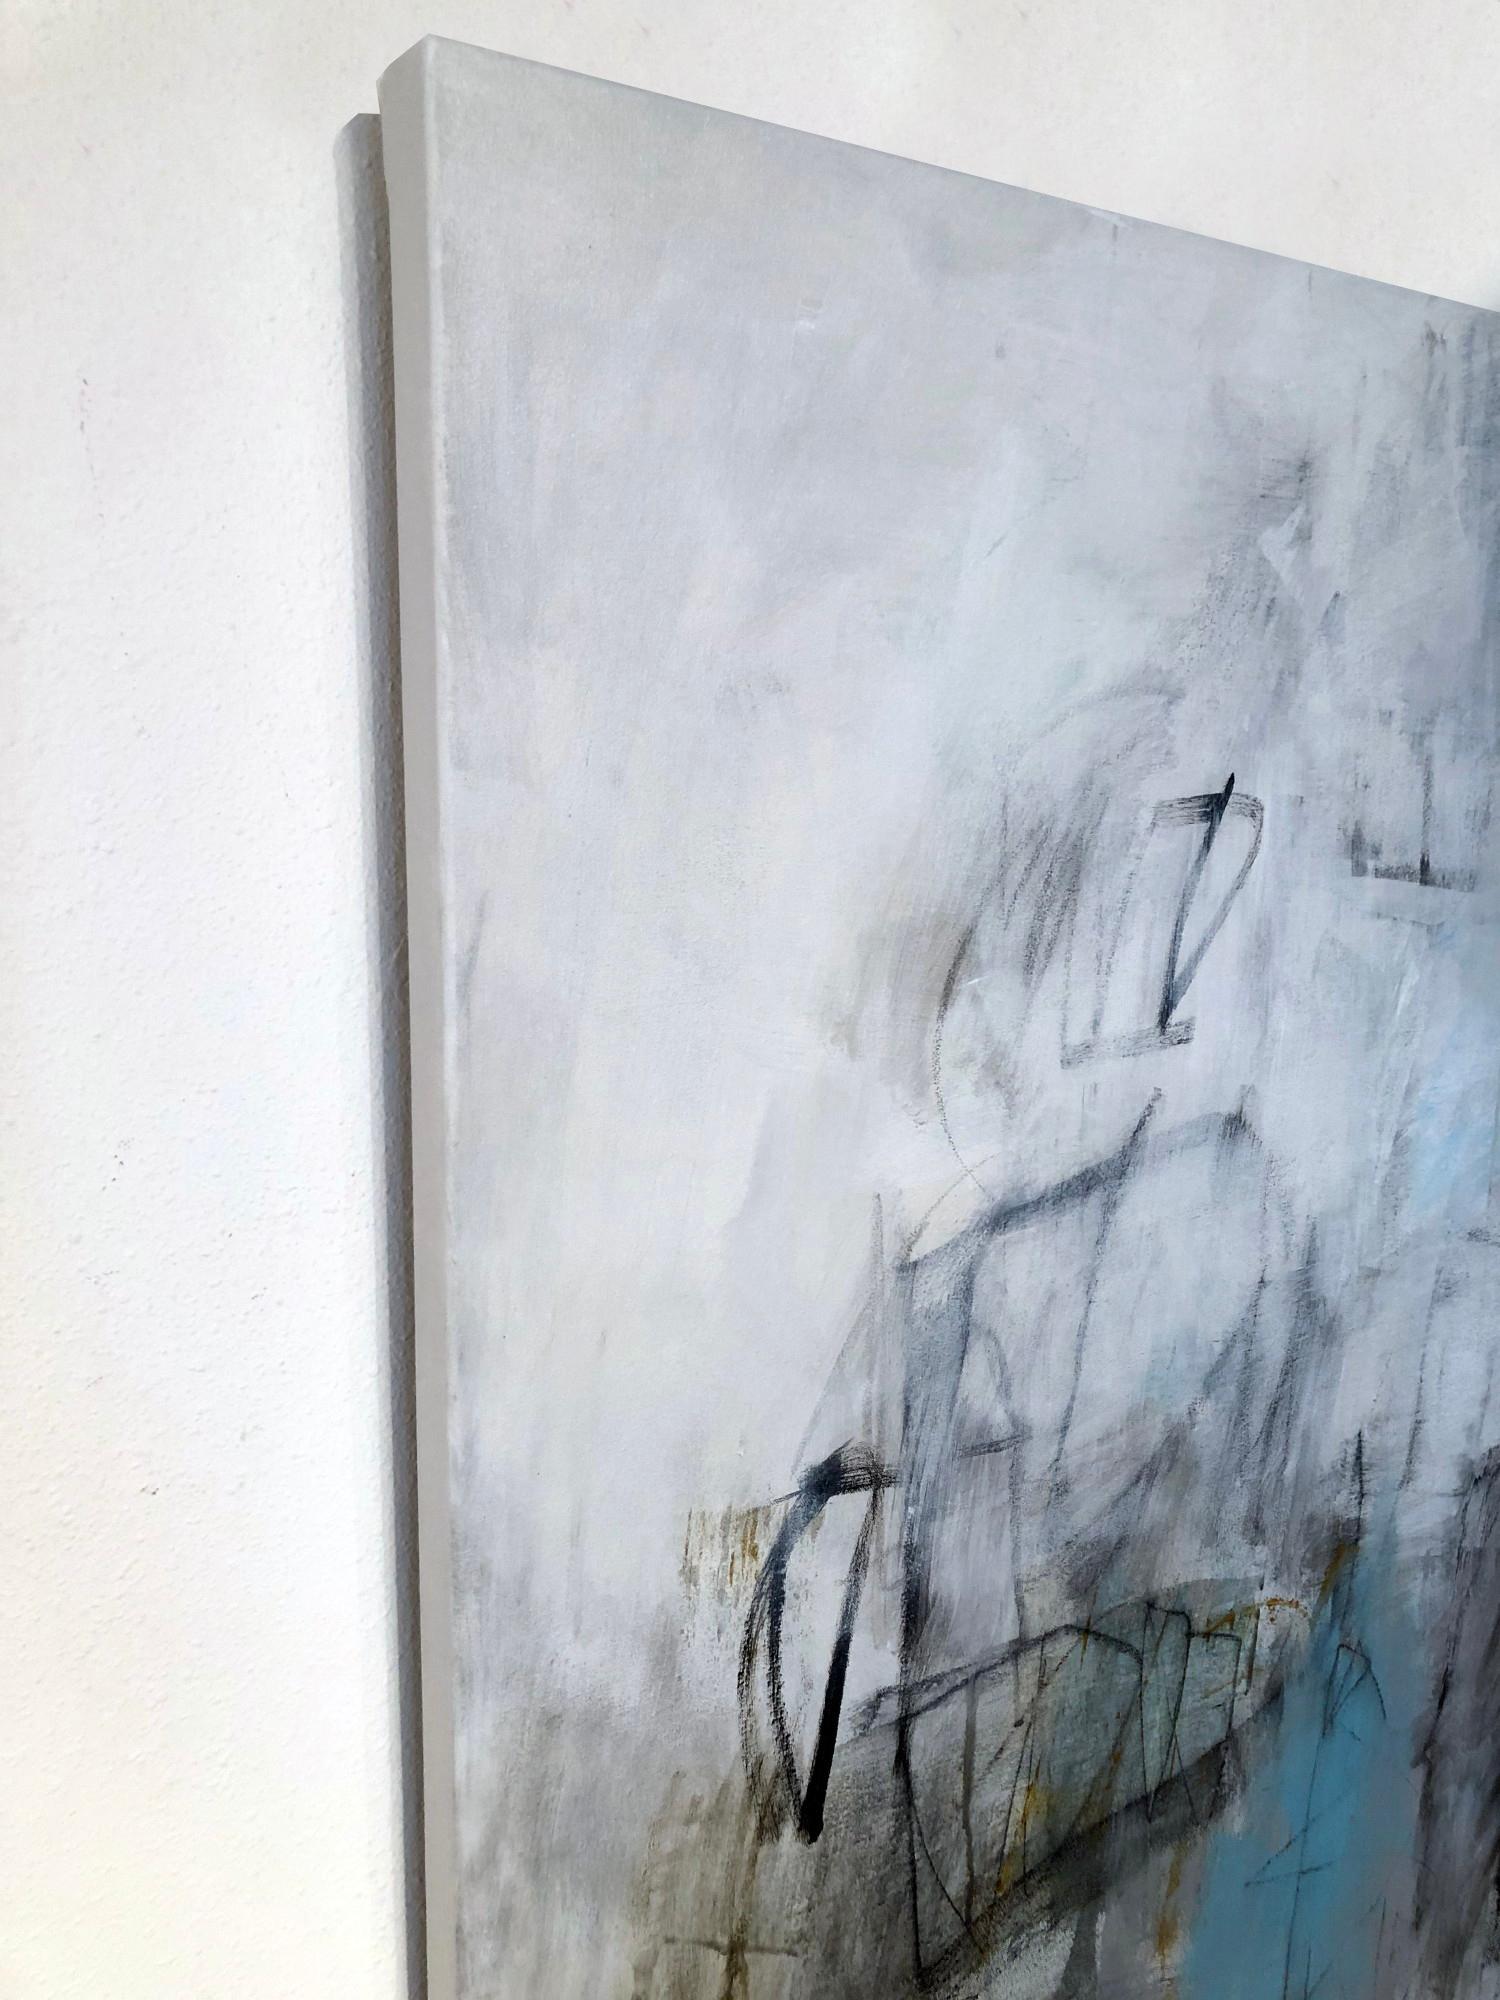 This large abstract painting combines an interplay of cool soothing color with perfect composition and balance. 
For exact shipping costs, please give location.

About the Artist: Julie Schumer, a native of Los Angeles, California, and born in 1954,